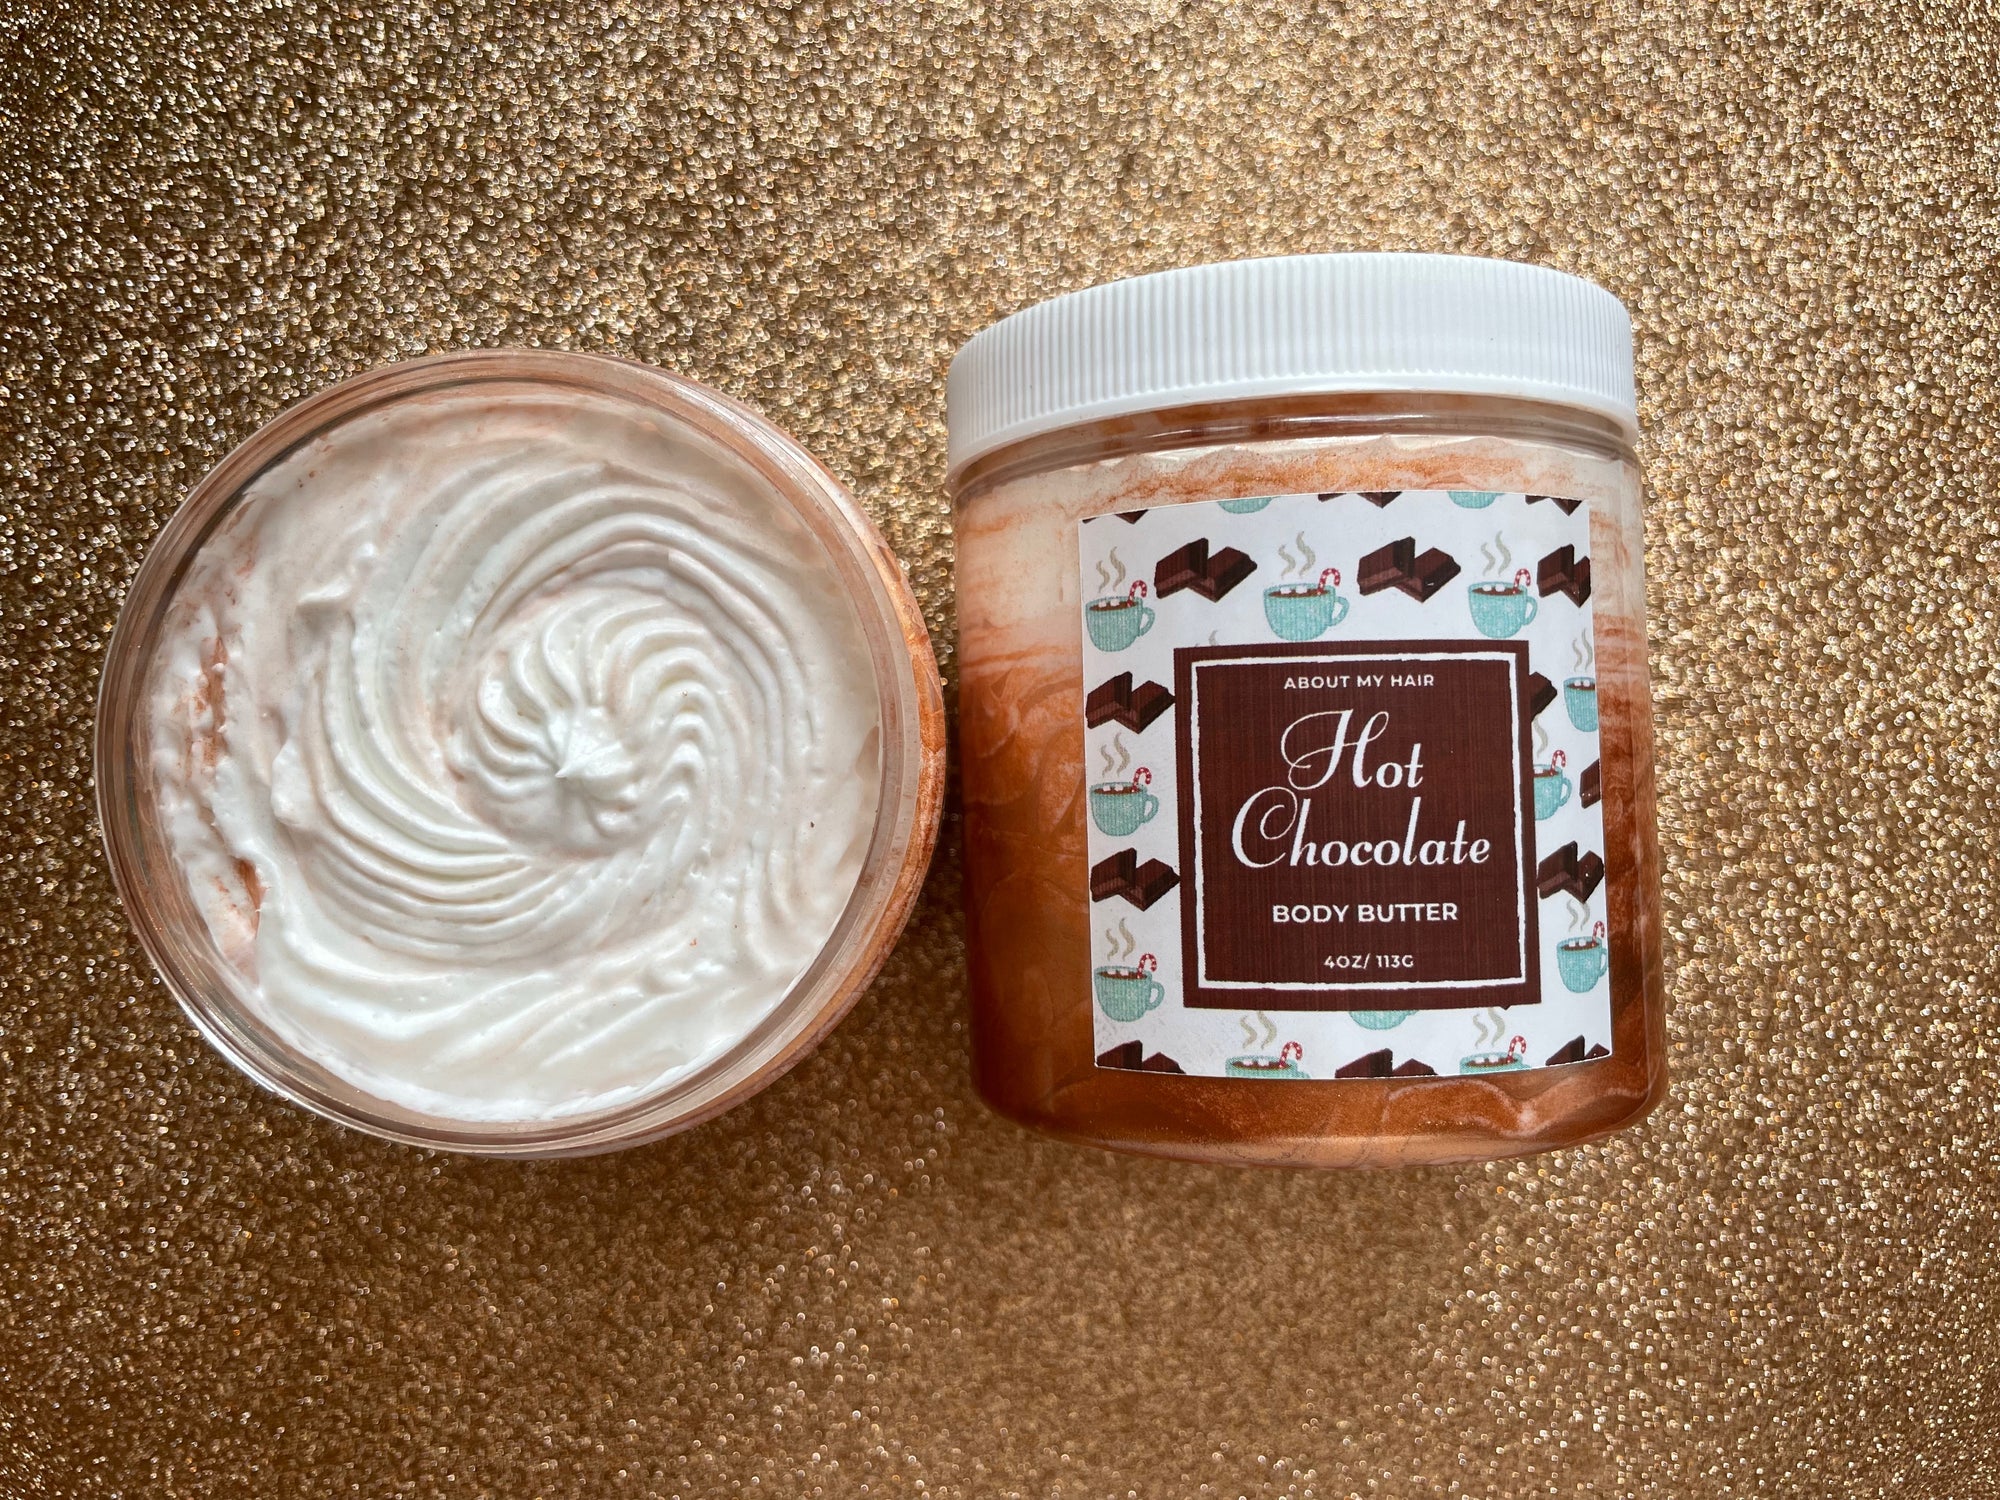 Hot Chocolate Body Butter | About My Hair Care